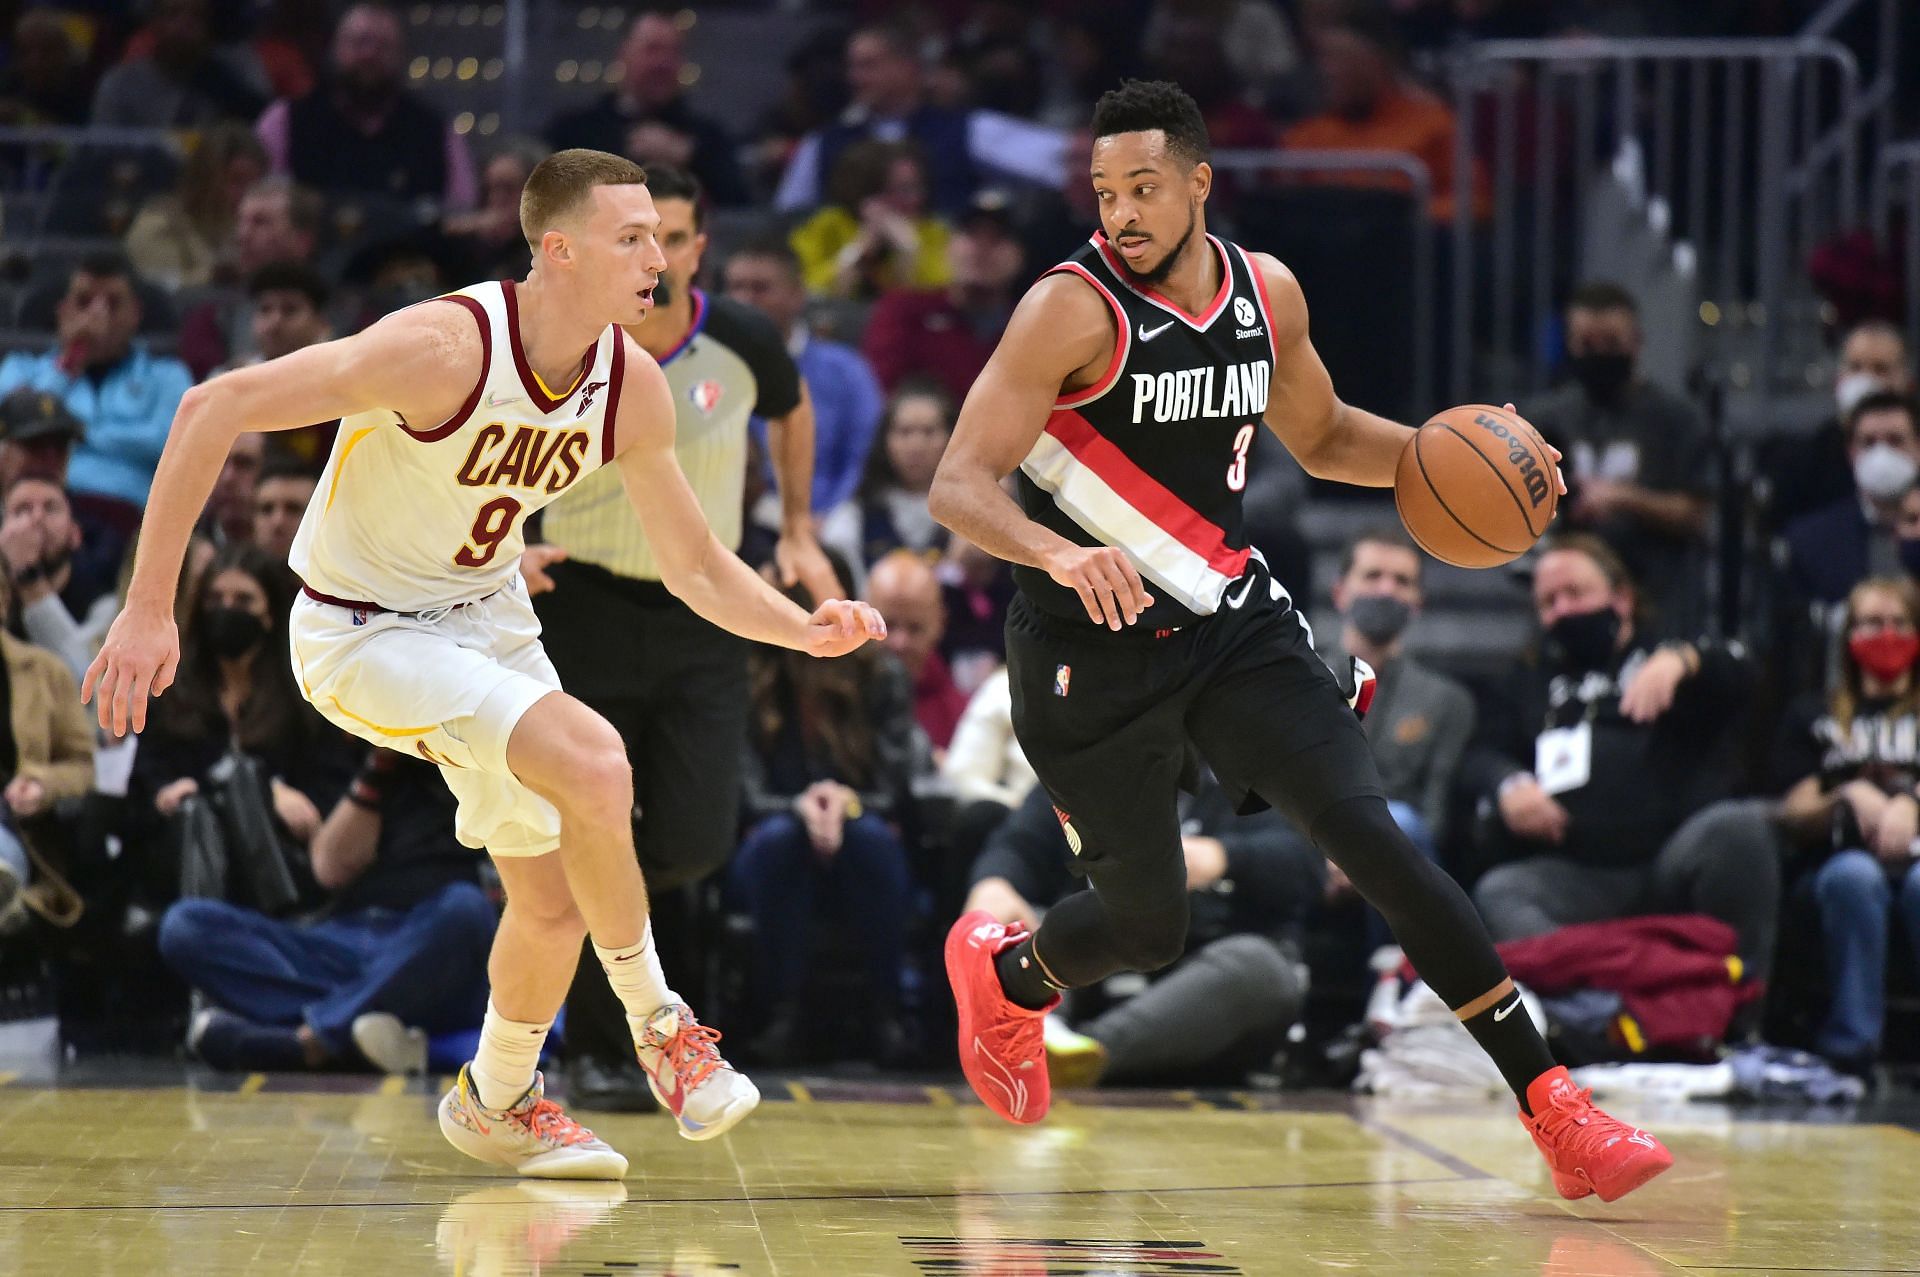 CJ McCollum #3 of the Portland Trail Blazers drives up court against Dylan Windler #9 of the Cleveland Cavaliers during the first half at Rocket Mortgage Fieldhouse on November 03, 2021 in Cleveland, Ohio.